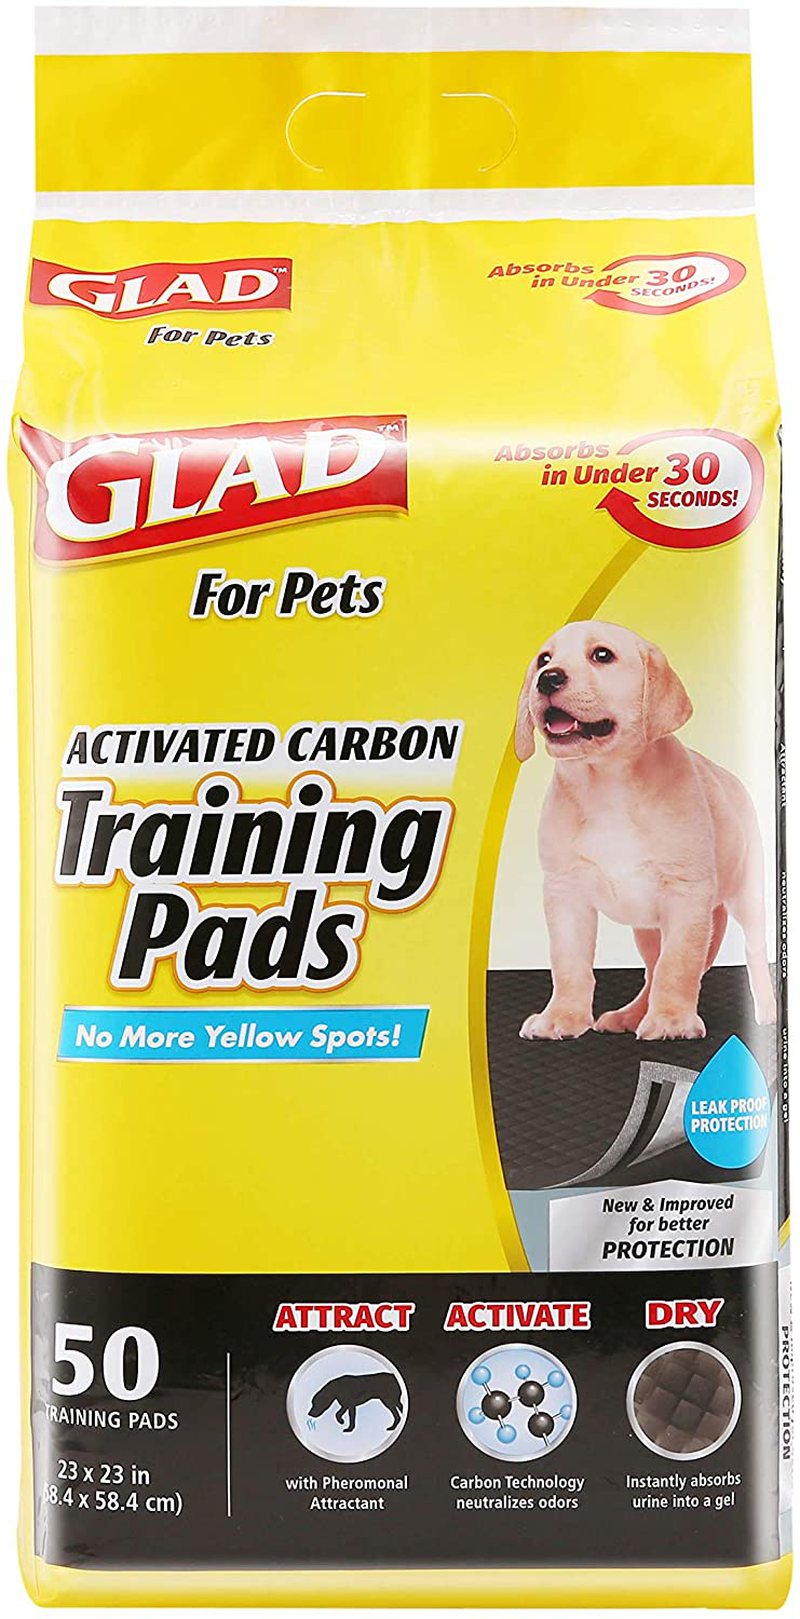 Glad for Pets Black Charcoal Puppy Pads-New & Improved Puppy Potty Training Pads That ABSORB & NEUTRALIZE Urine Instantly-Training Pads for Dogs, Dog Pee Pads, Pee Pads for Dogs, Dog Crate Pads